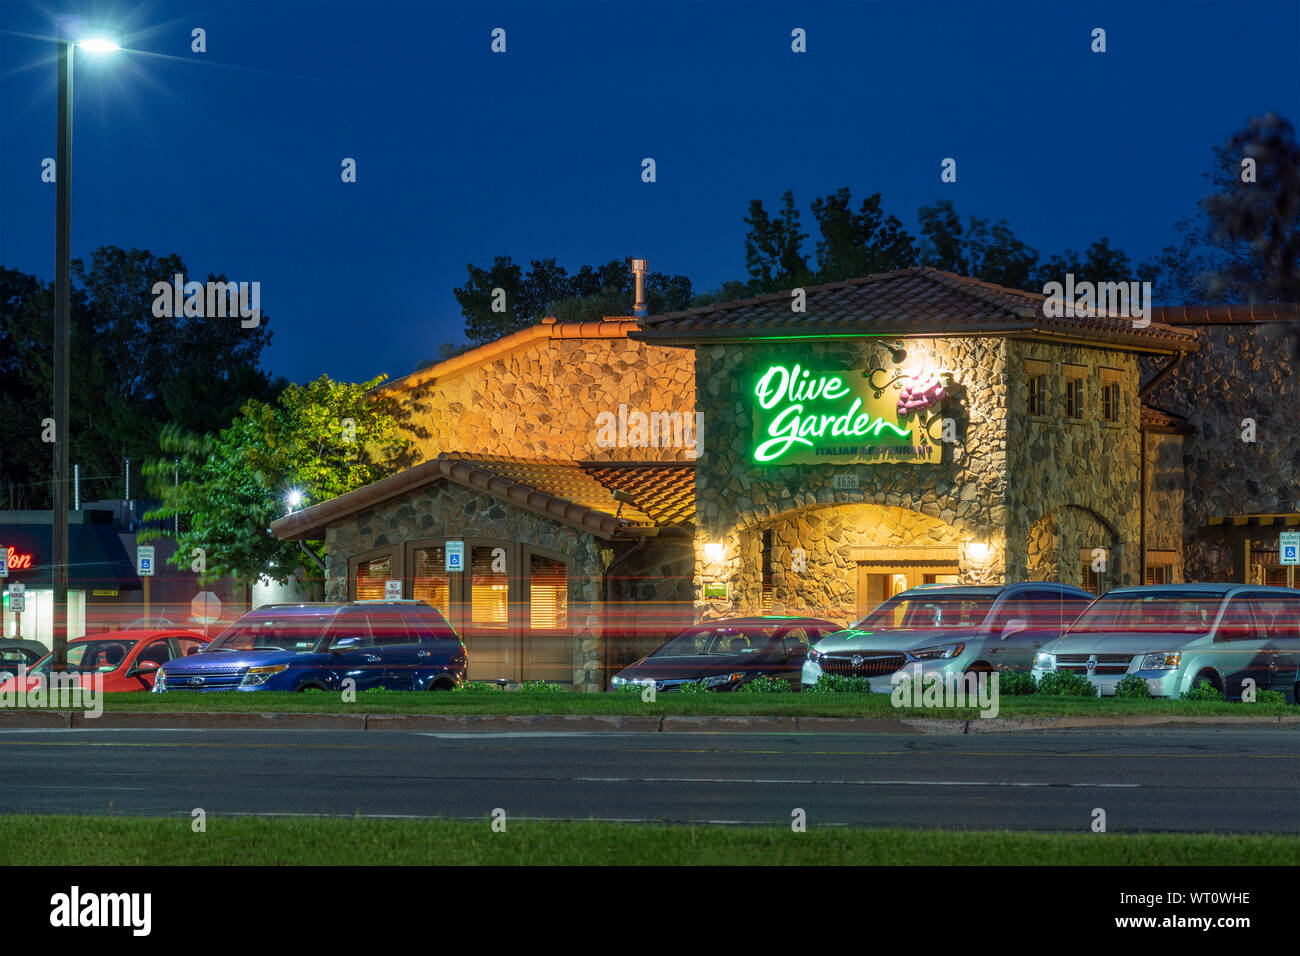 Garden State Diner High Resolution Stock Photography And Images Alamy